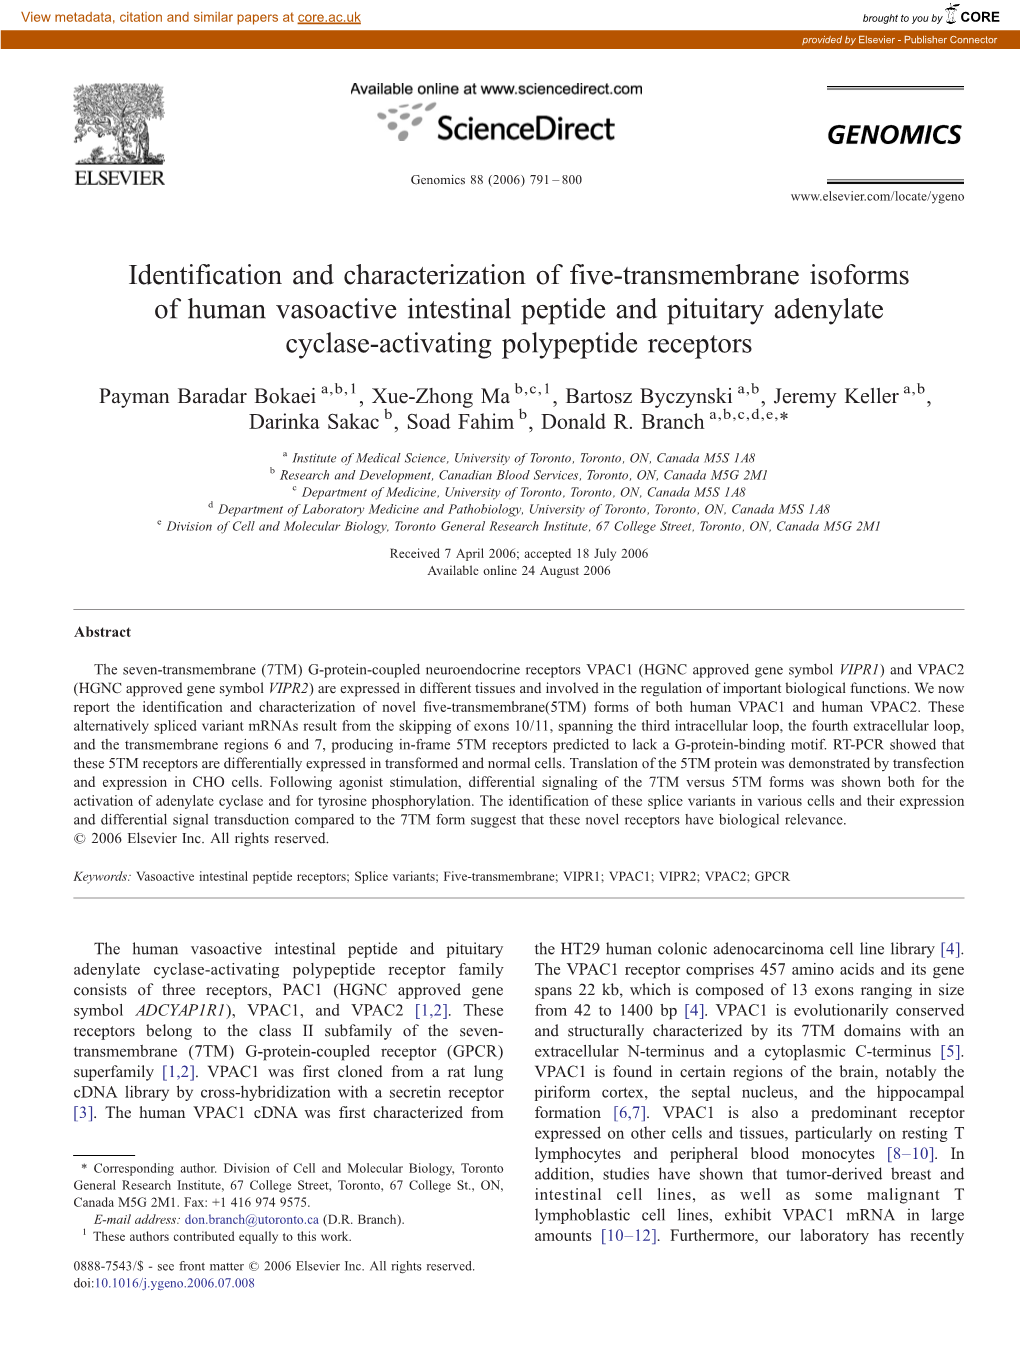 Identification and Characterization of Five-Transmembrane Isoforms Of